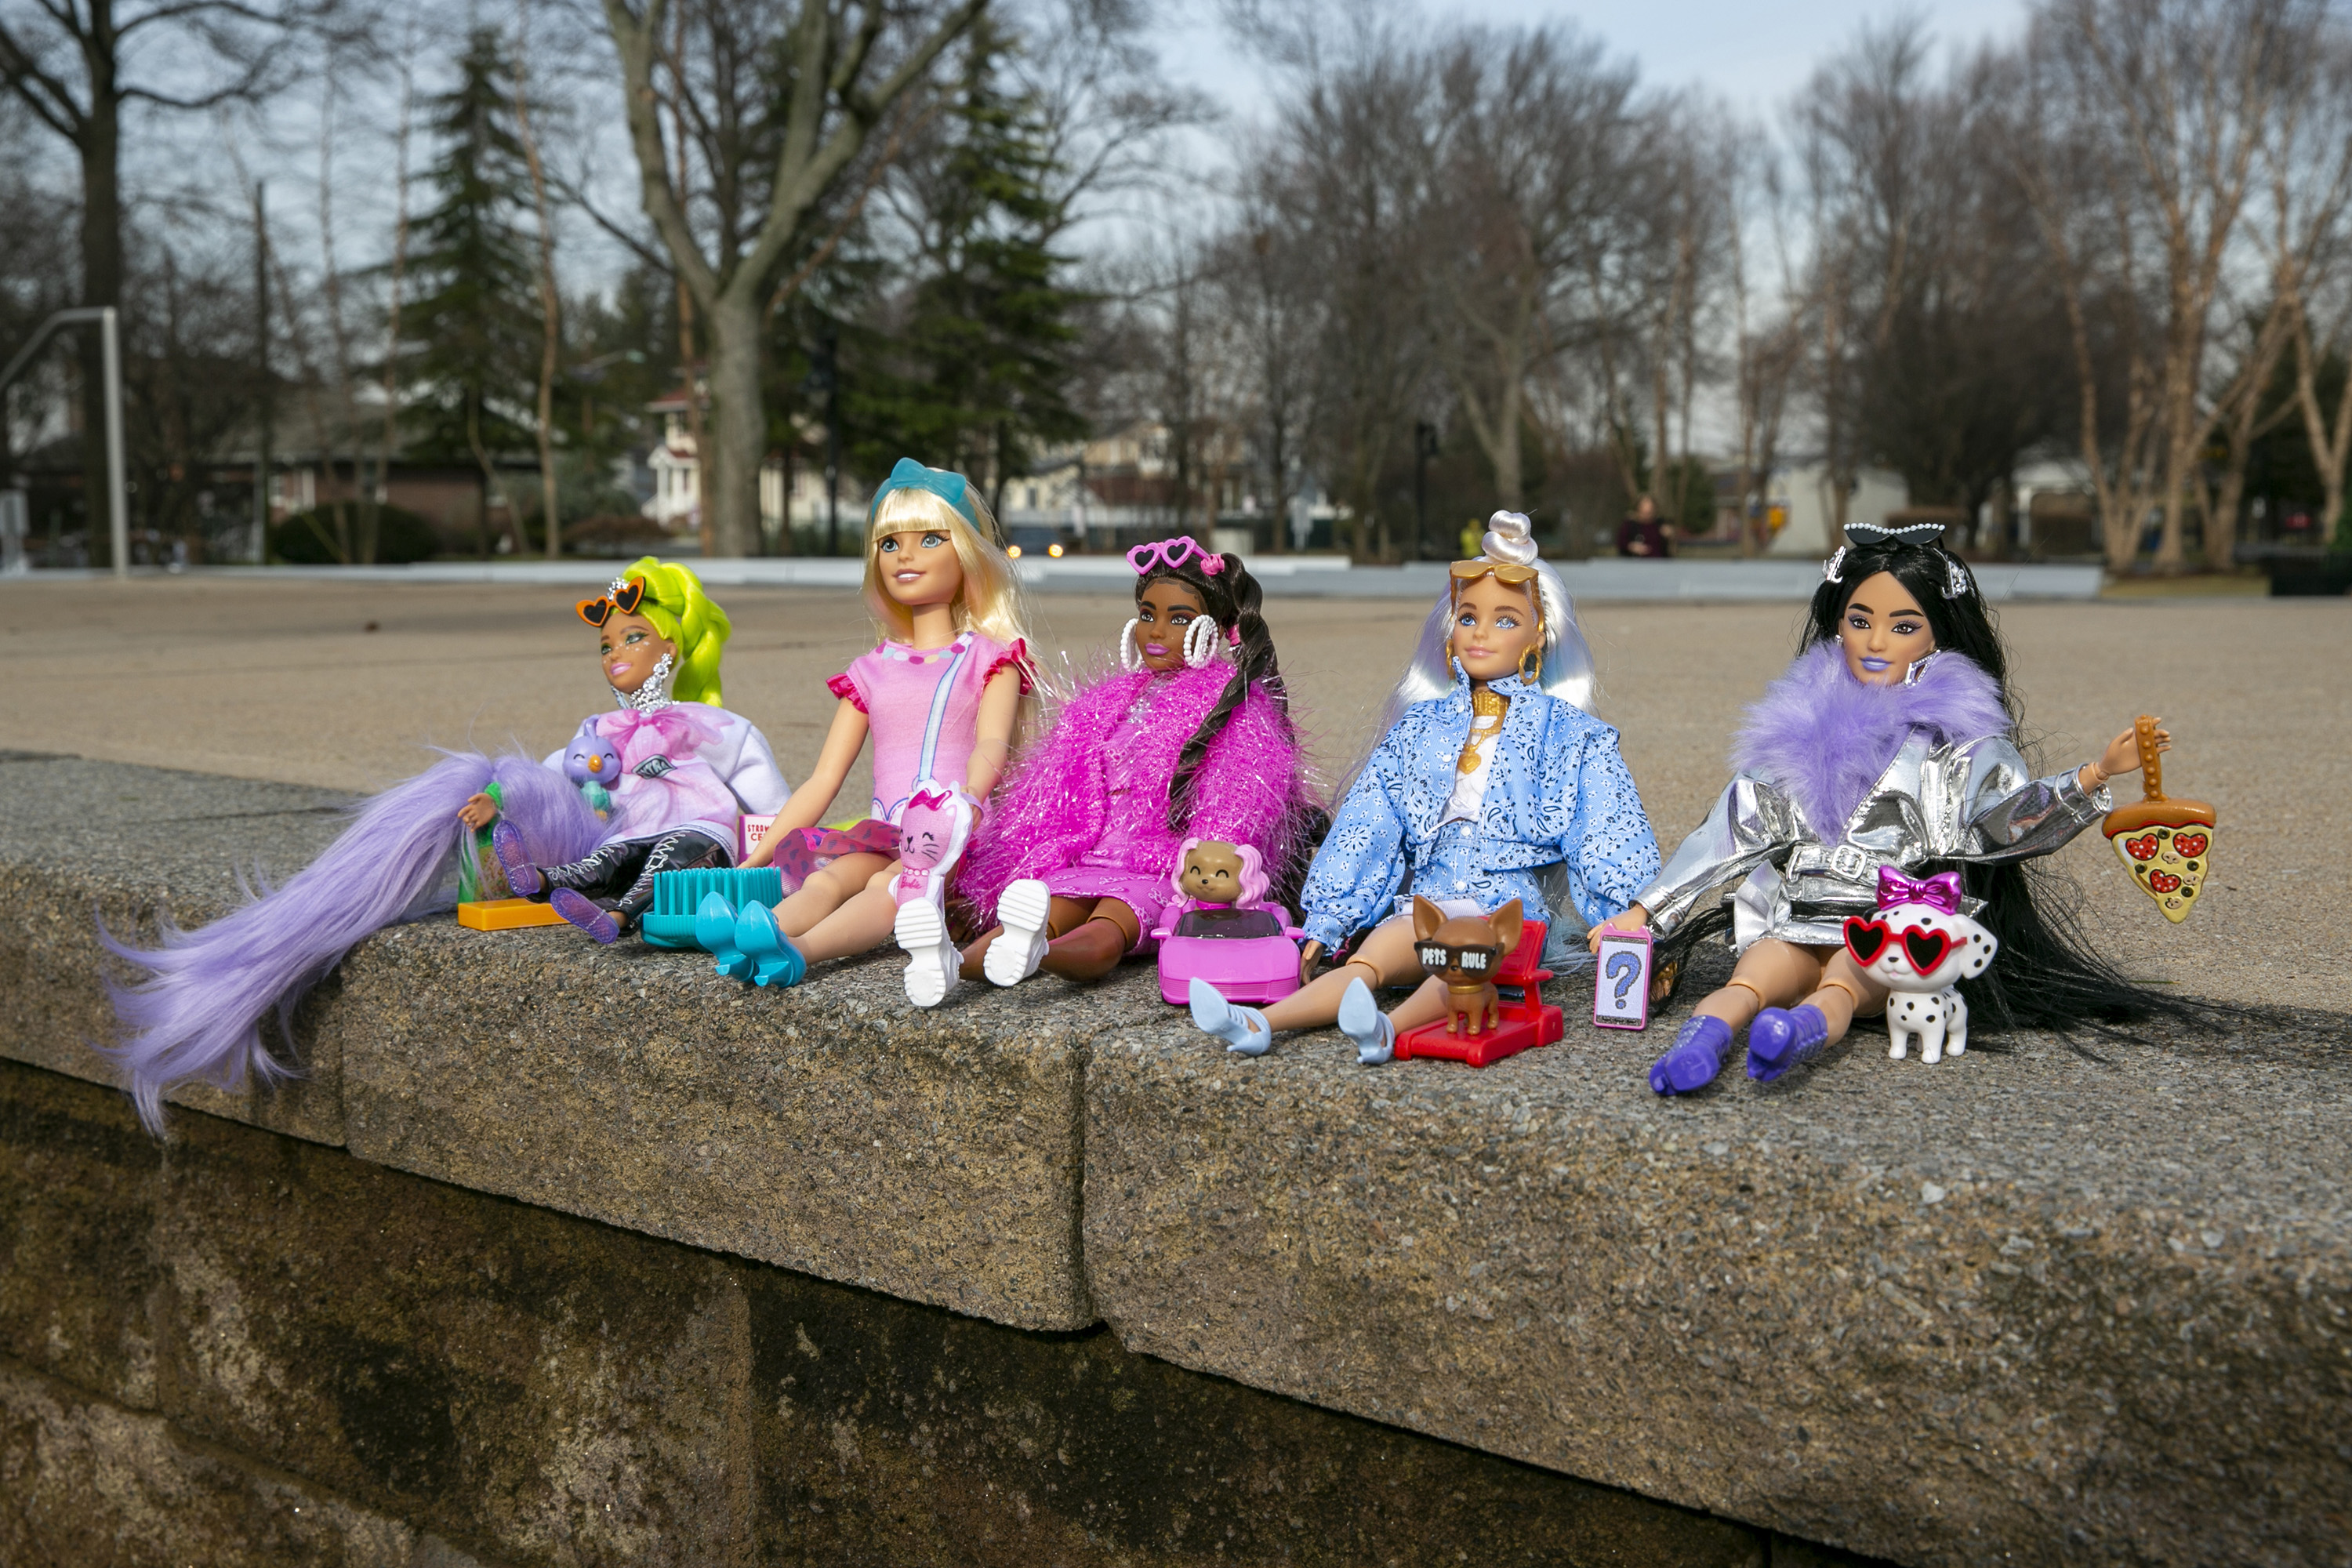 Mattel's first Barbie doll for preschool children, second from left, called My First Barbie, sits with a collection of Barbie Extra dolls in Lyndhurst, New Jersey, on Wednesday, Jan. 4, 2022. The preschool Barbie is taller and softer than regular Barbies, with long rooted hair, younger features and more flexible hands and legs. The Barbie Extra dolls are curvier and come with pets and other accessories.